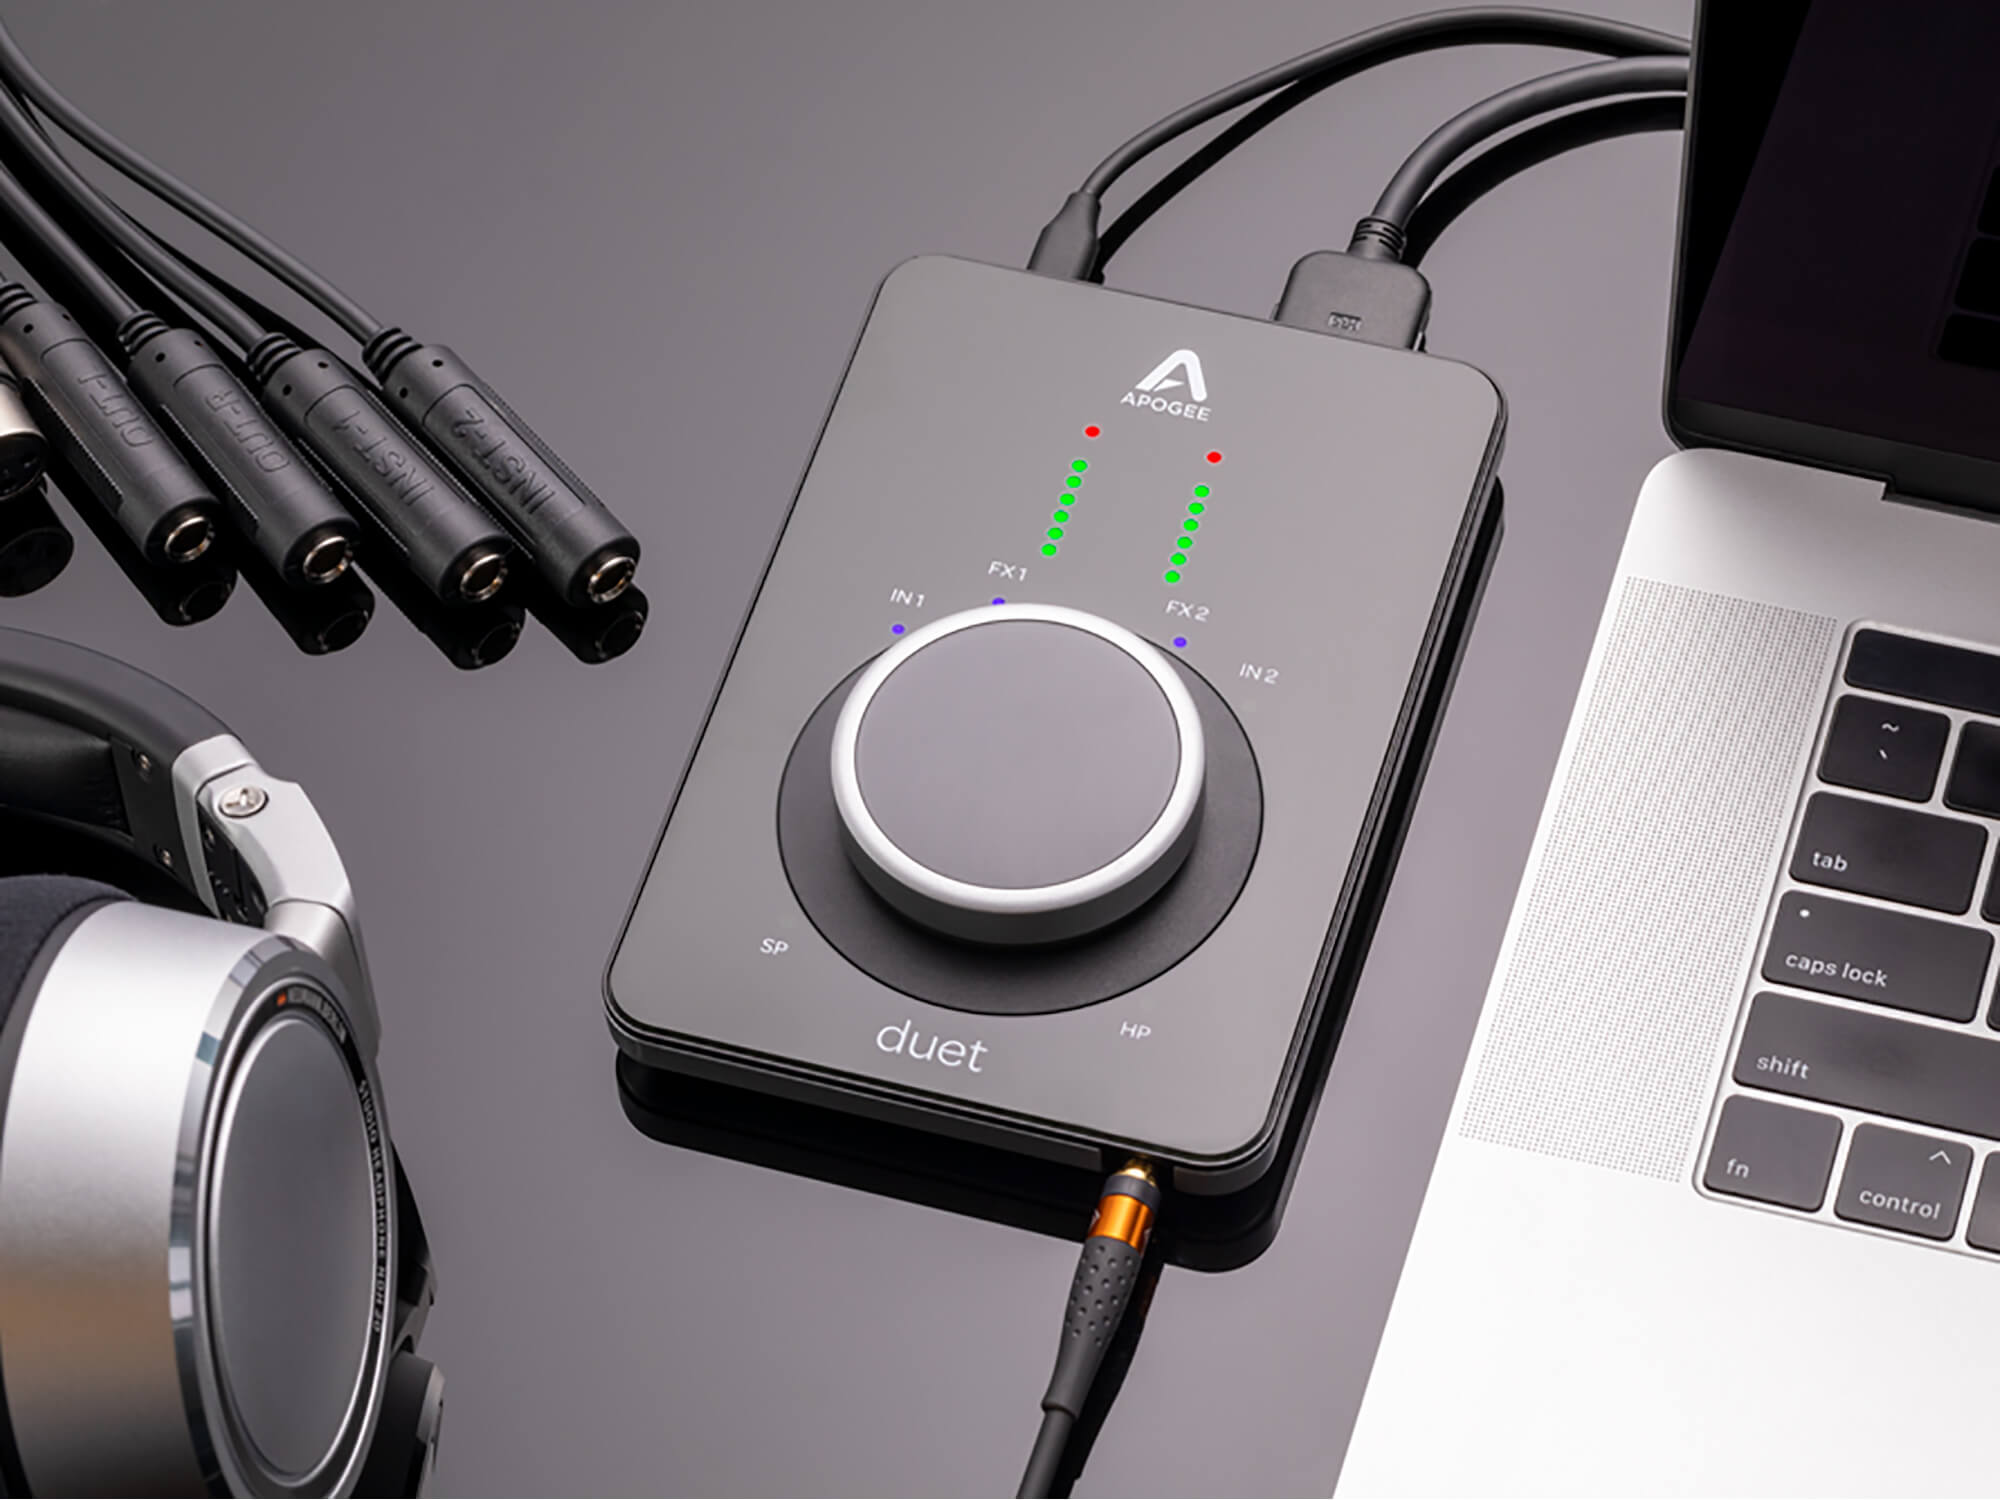 How To Connect Apogee Duet Audio Interface To Speakers